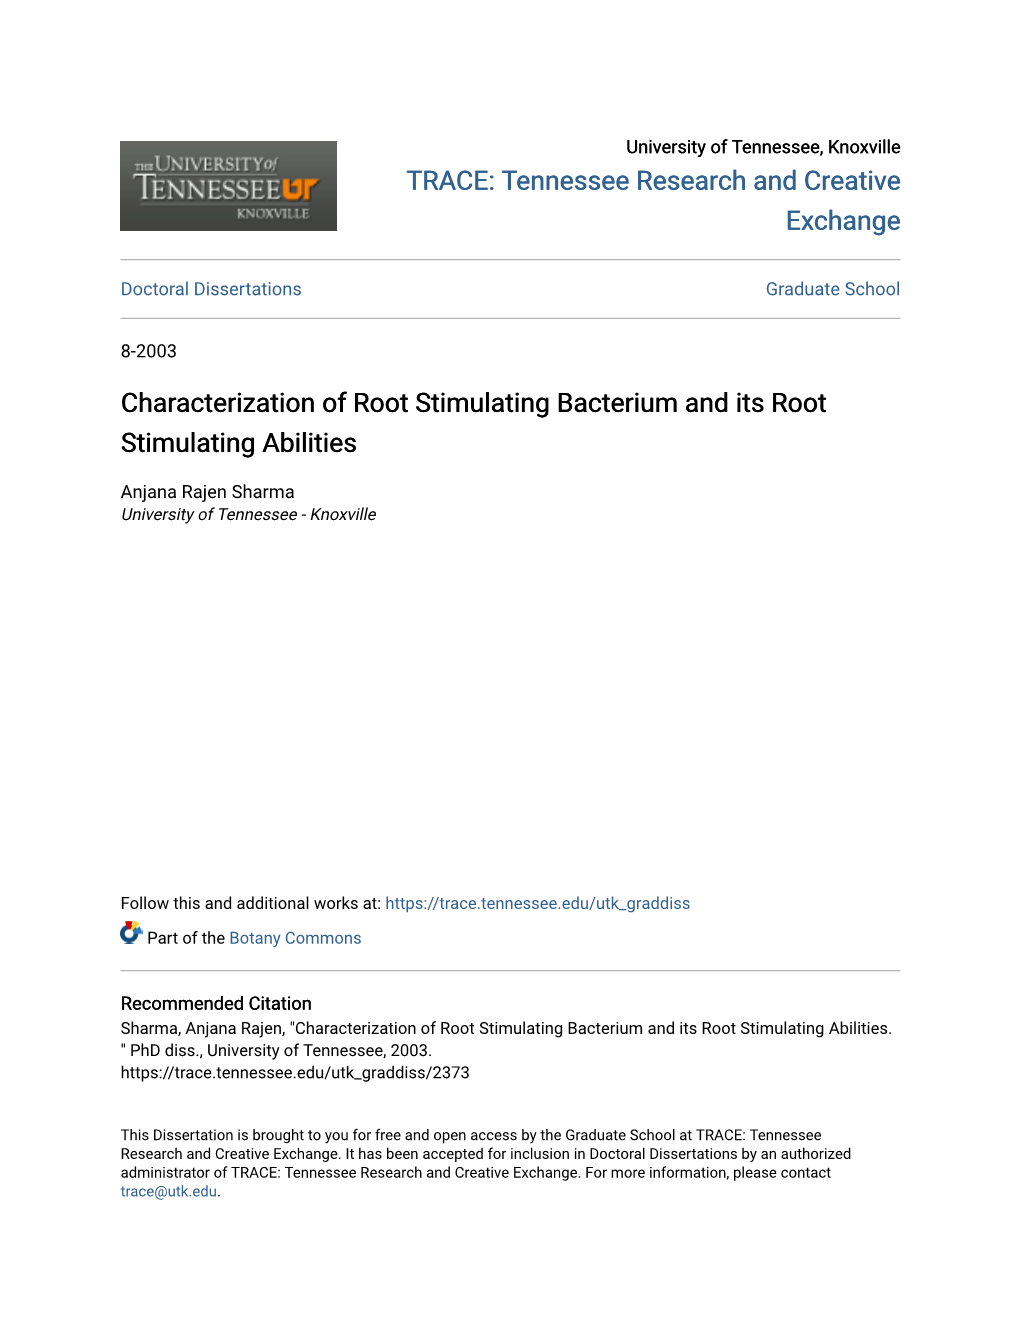 Characterization of Root Stimulating Bacterium and Its Root Stimulating Abilities